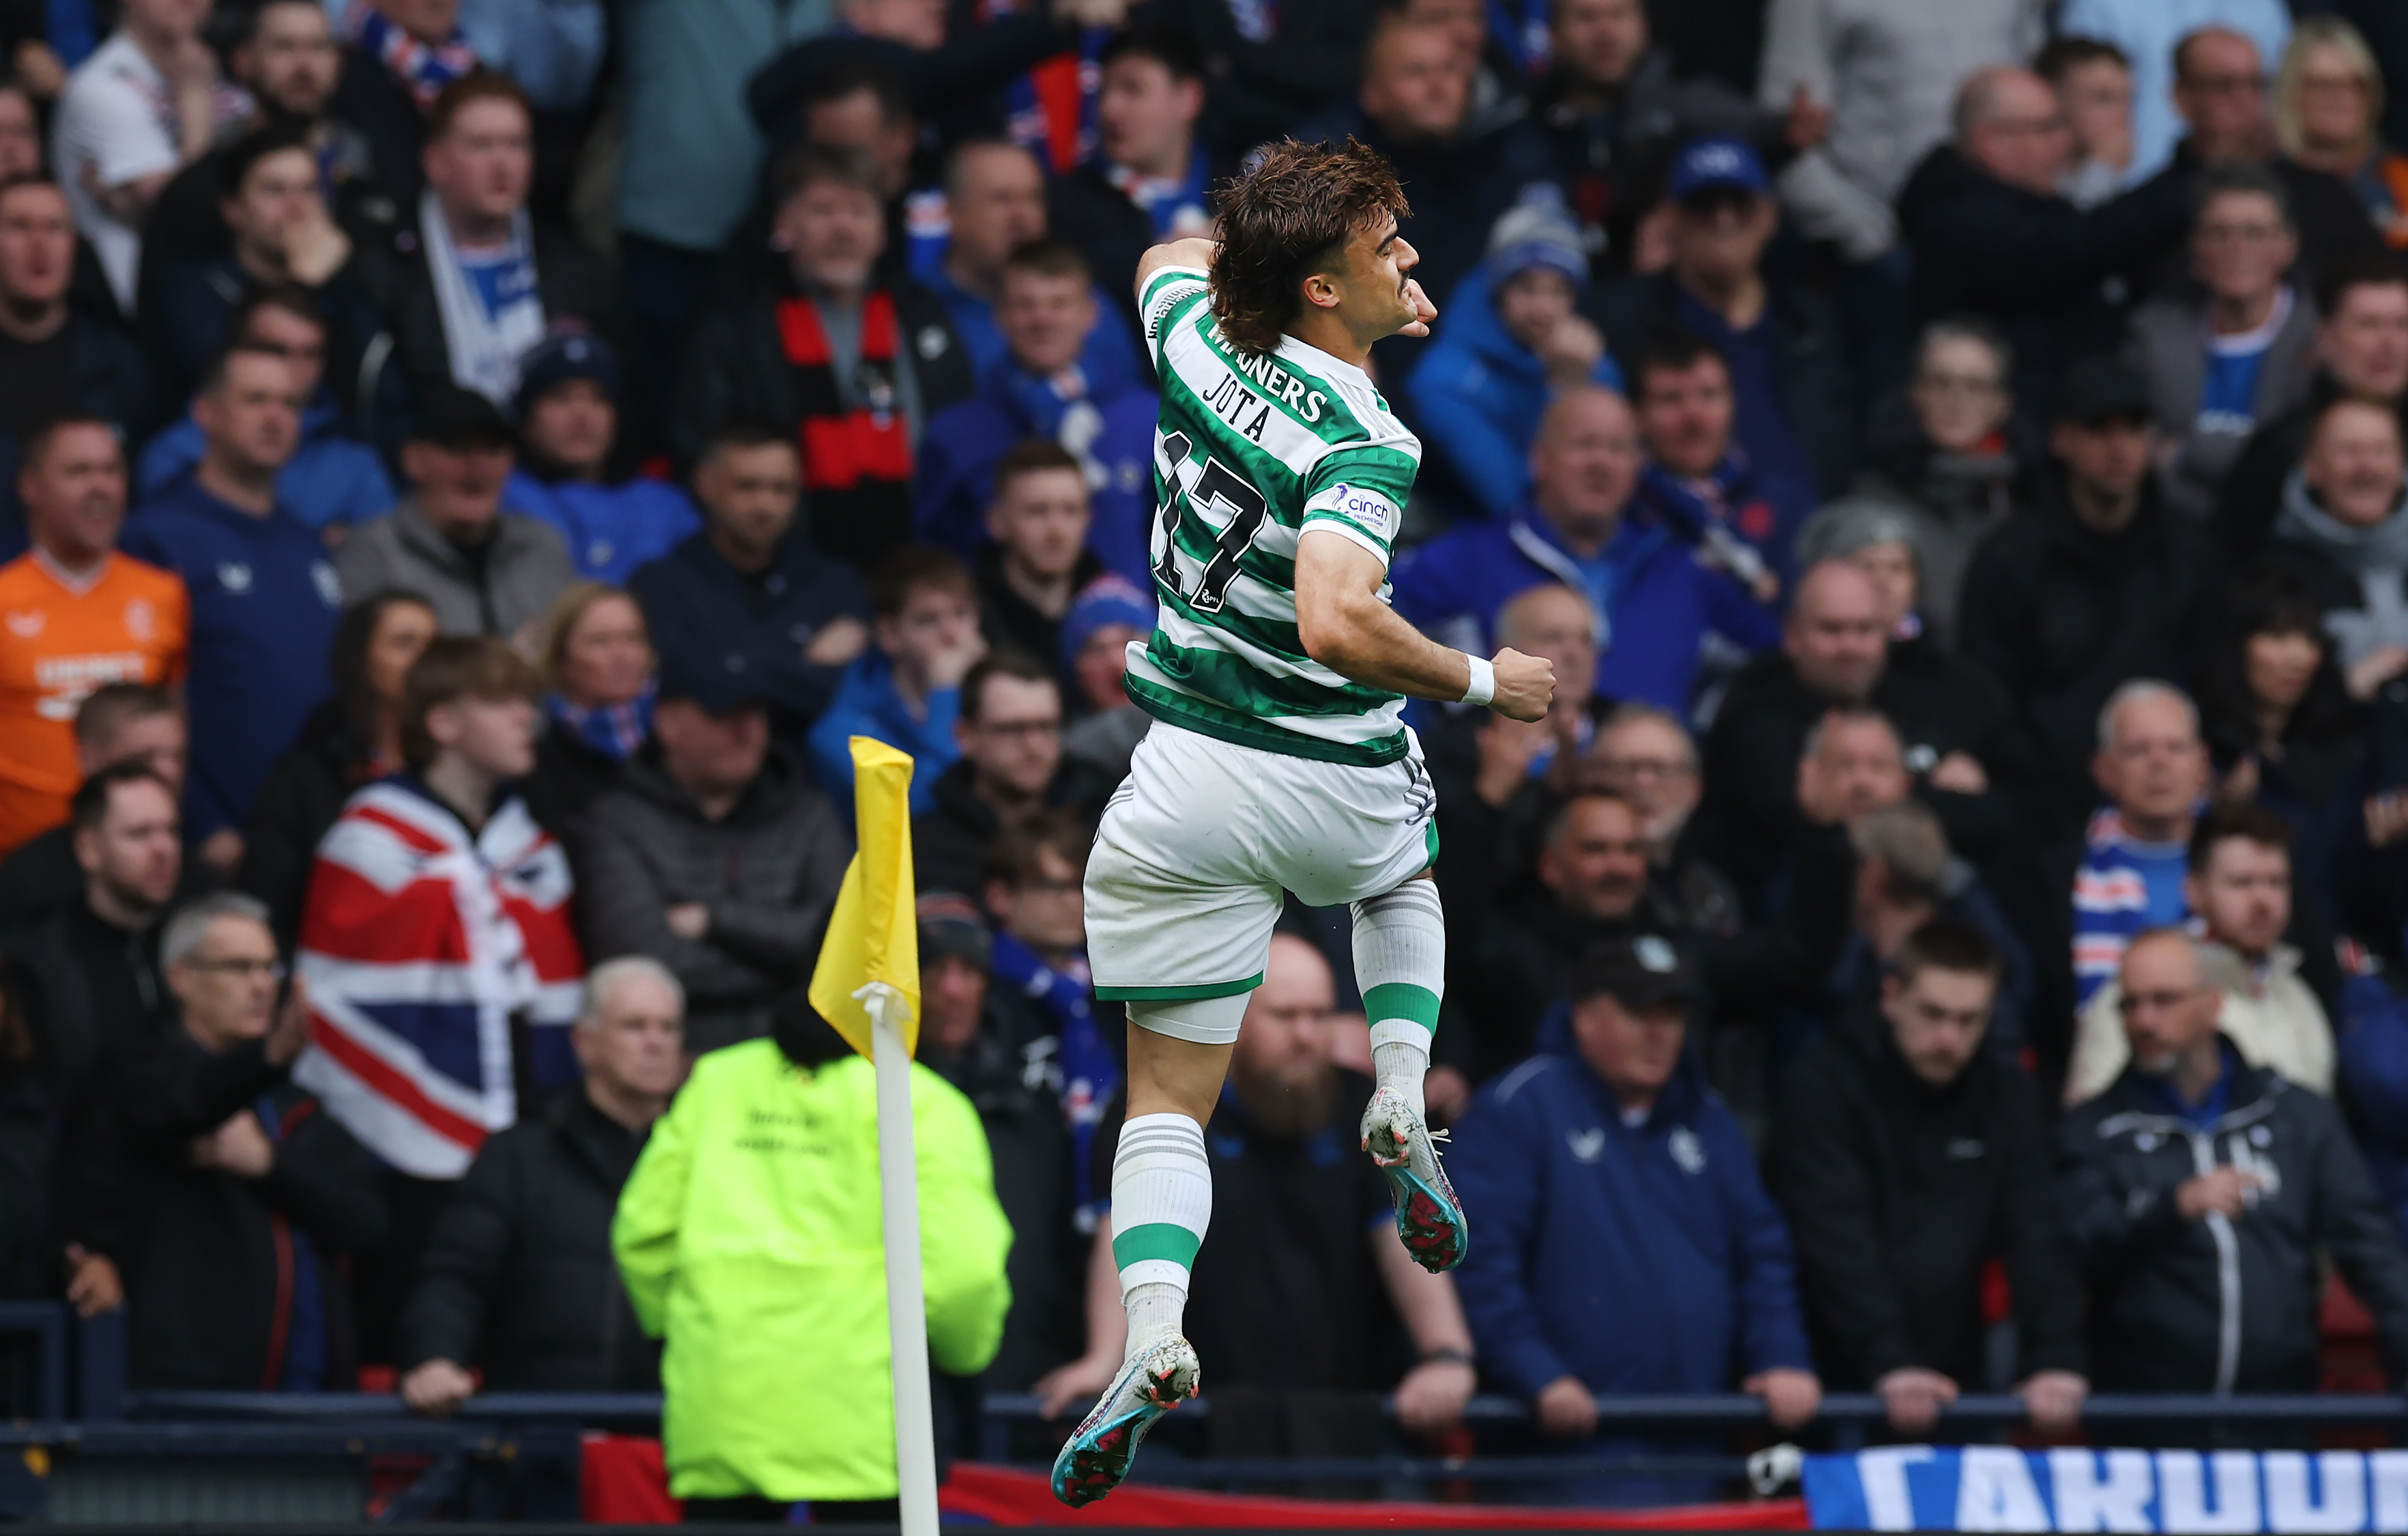 Celtic's Kyogo Furuhashi lands double to sink Rangers in League